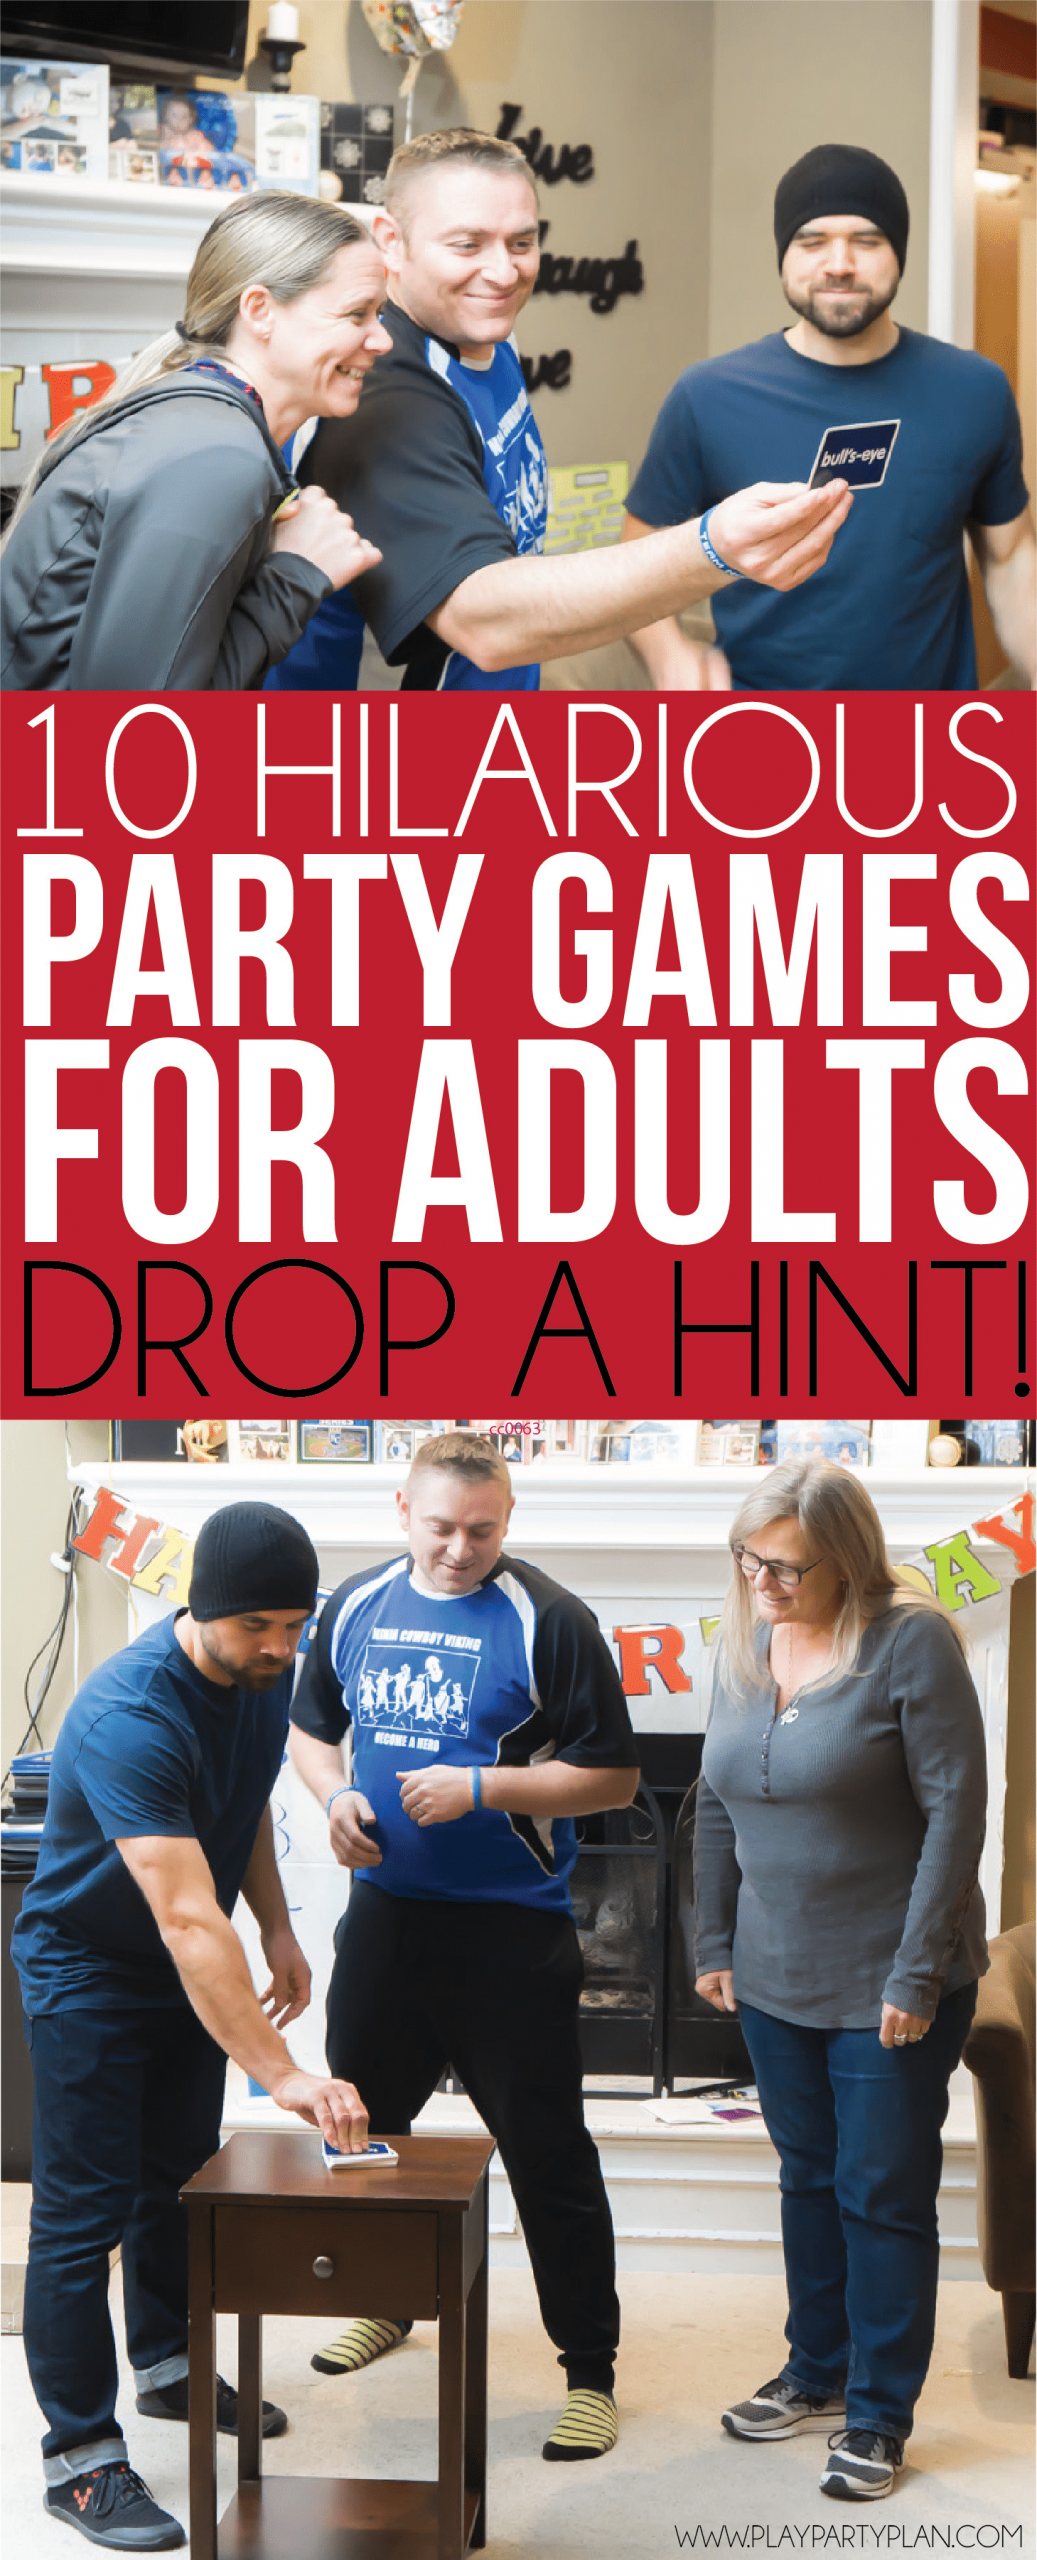 Fun Group Ideas For Adults
 19 Hilarious Party Games for Adults Play Party Plan